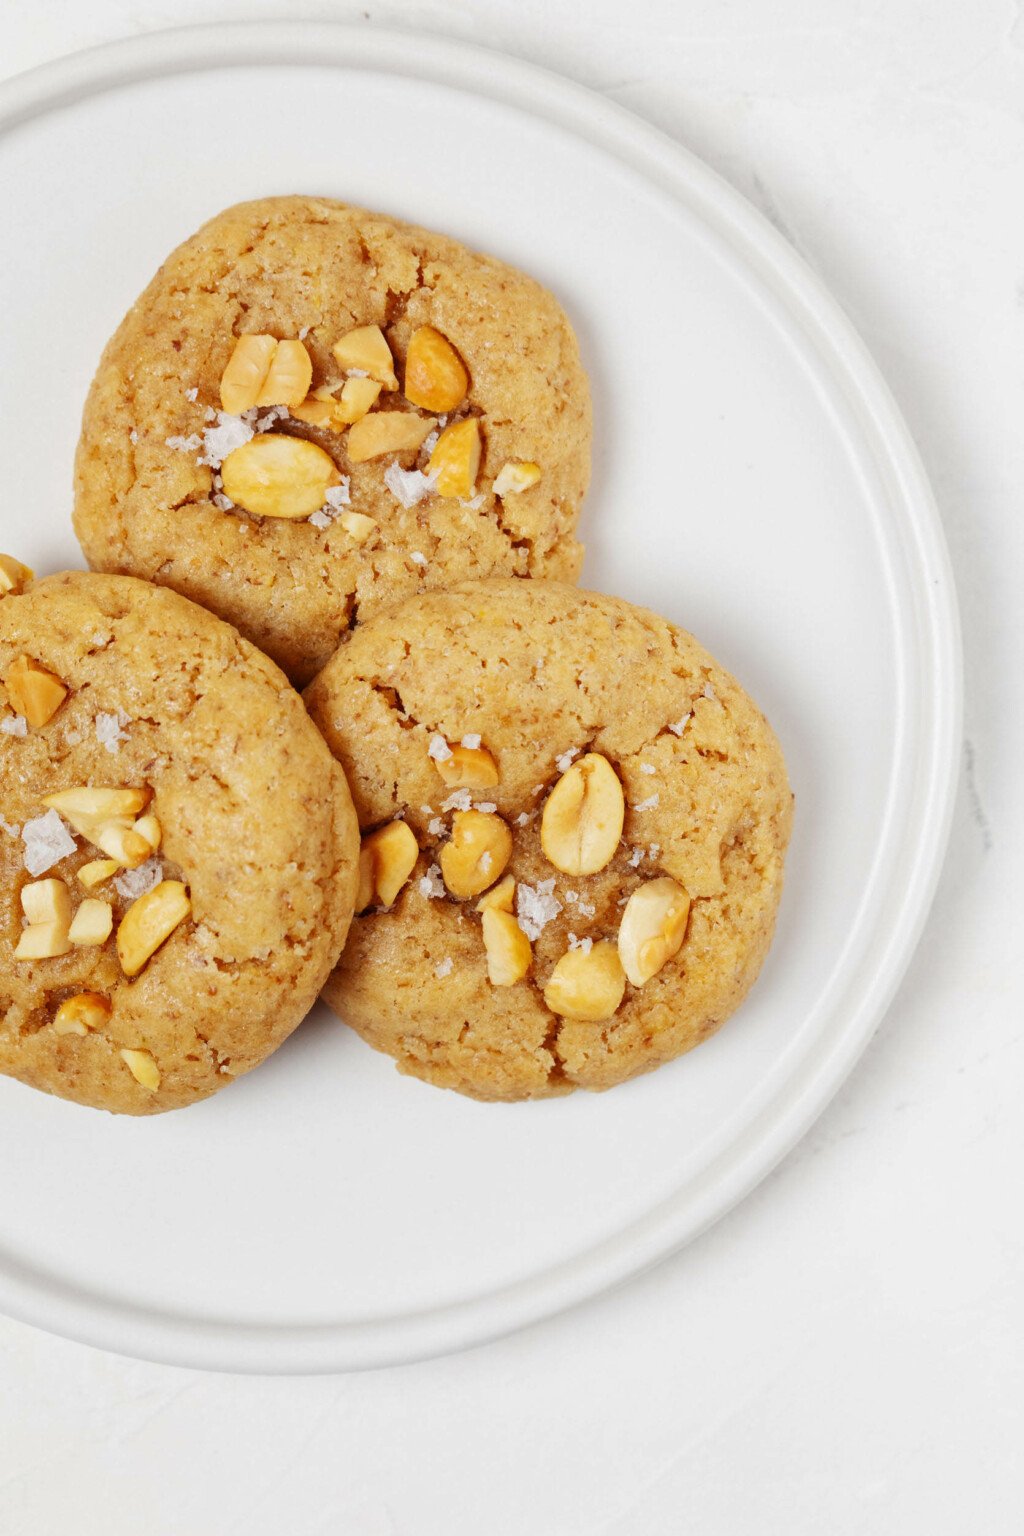 Three round, puffy vegan peanut cookies are positioned on a round, white plate.